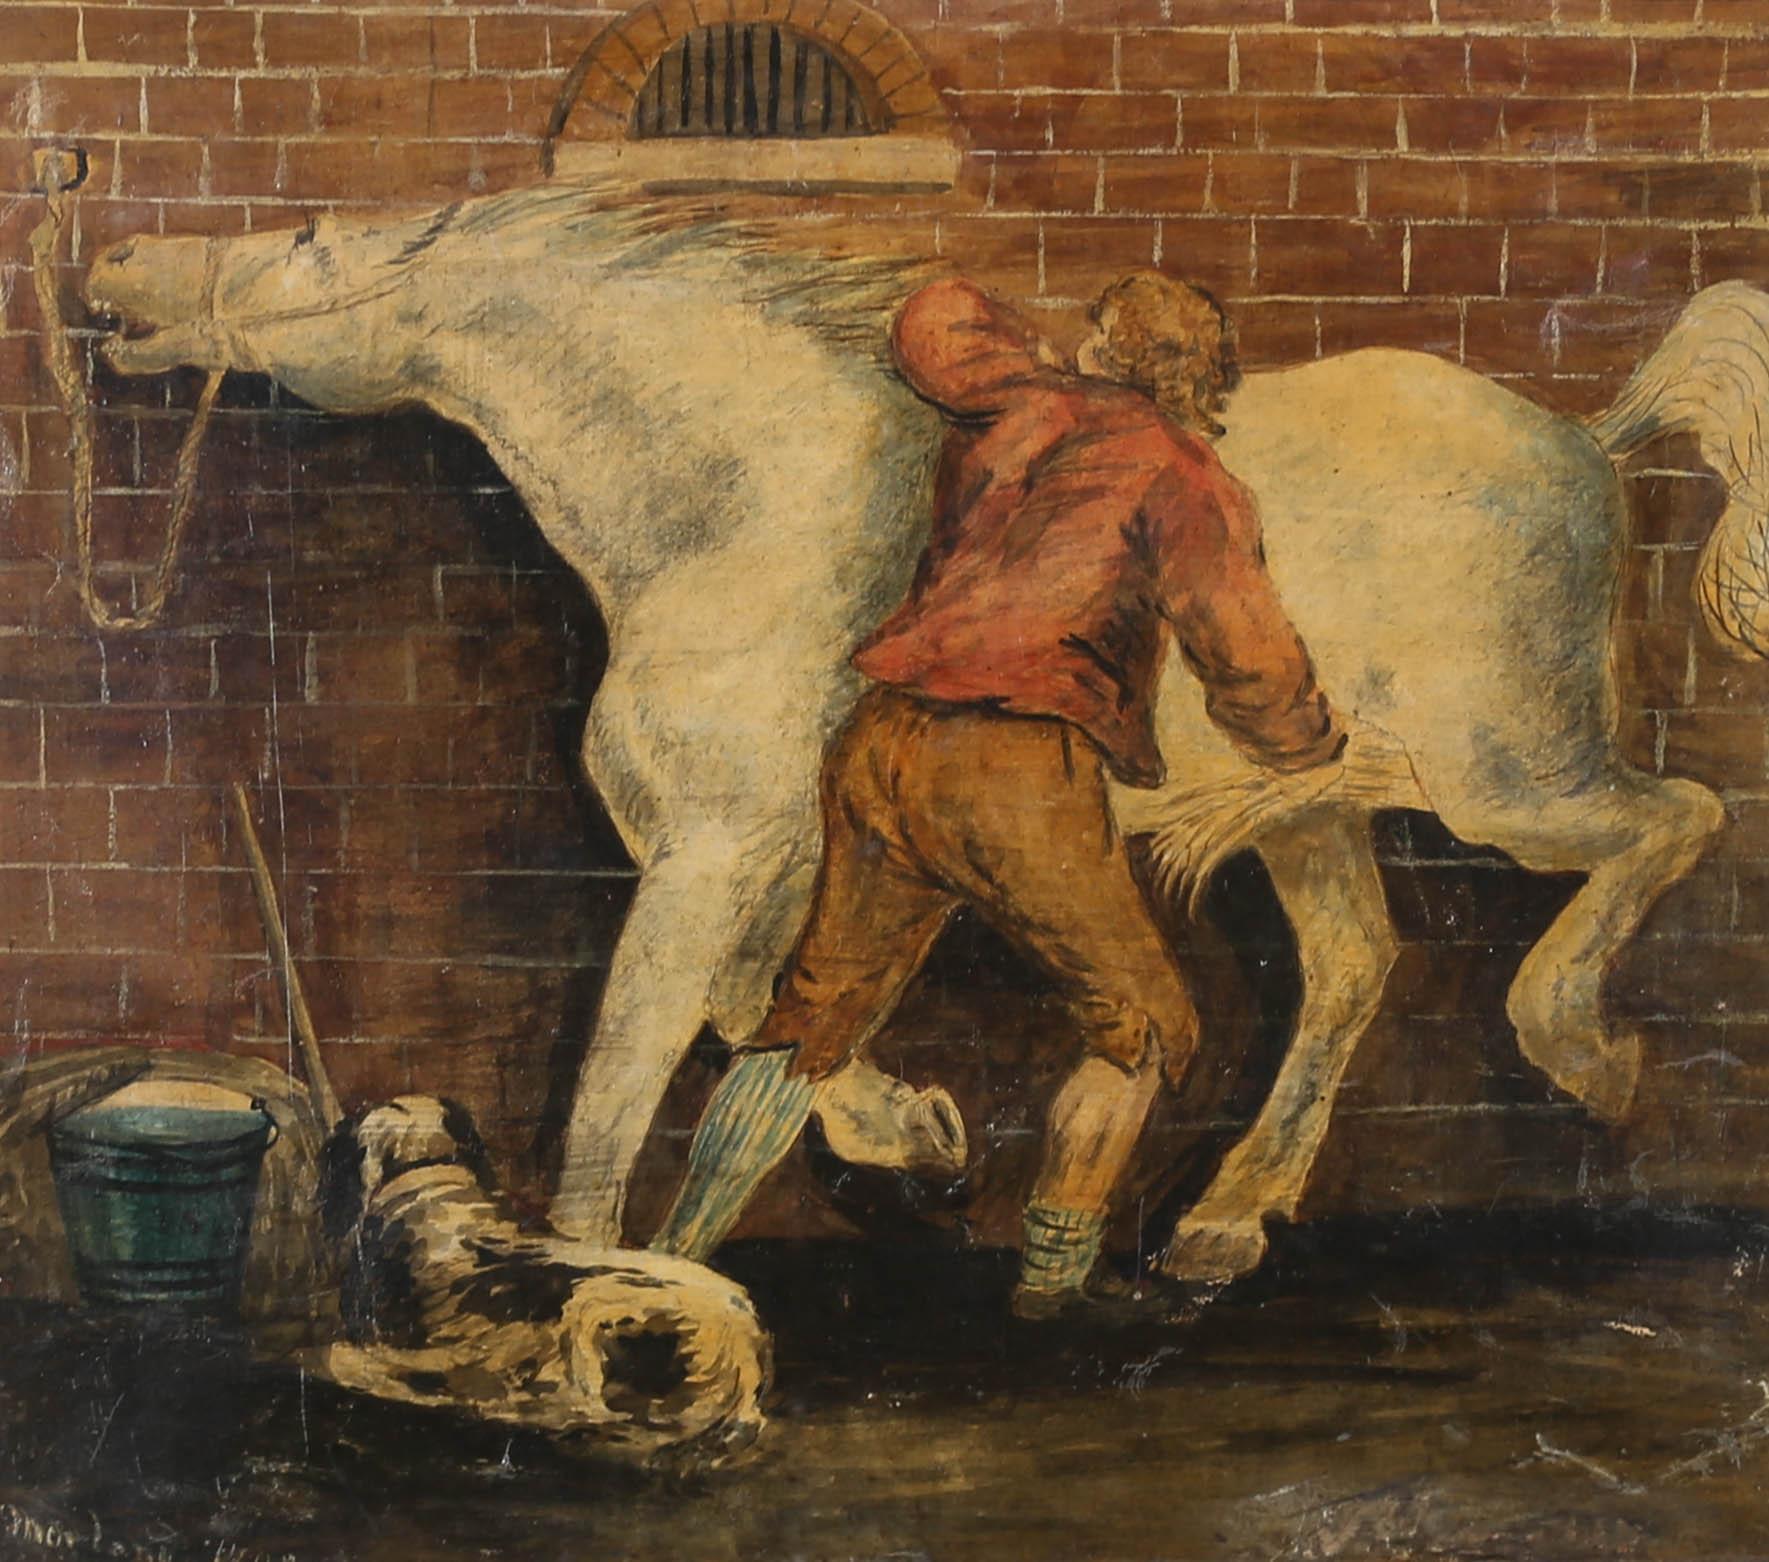 A dramatic stable interior scene in watercolour, showing a man hurriedly grooming a distressed horse. The scene is typical of George Morland's subject matter and style. The artist has inscribed 